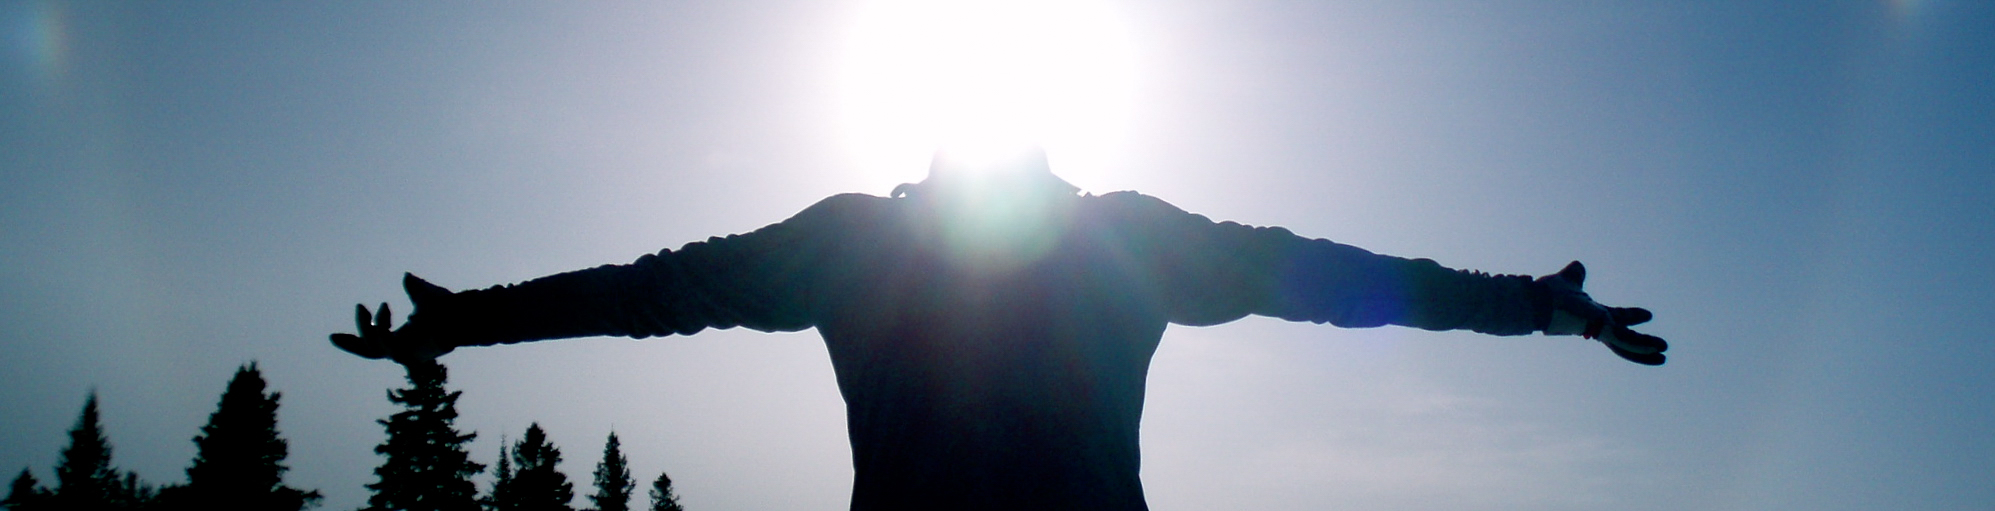 Silhouette of a person with their arms outstretched against the sun & sky